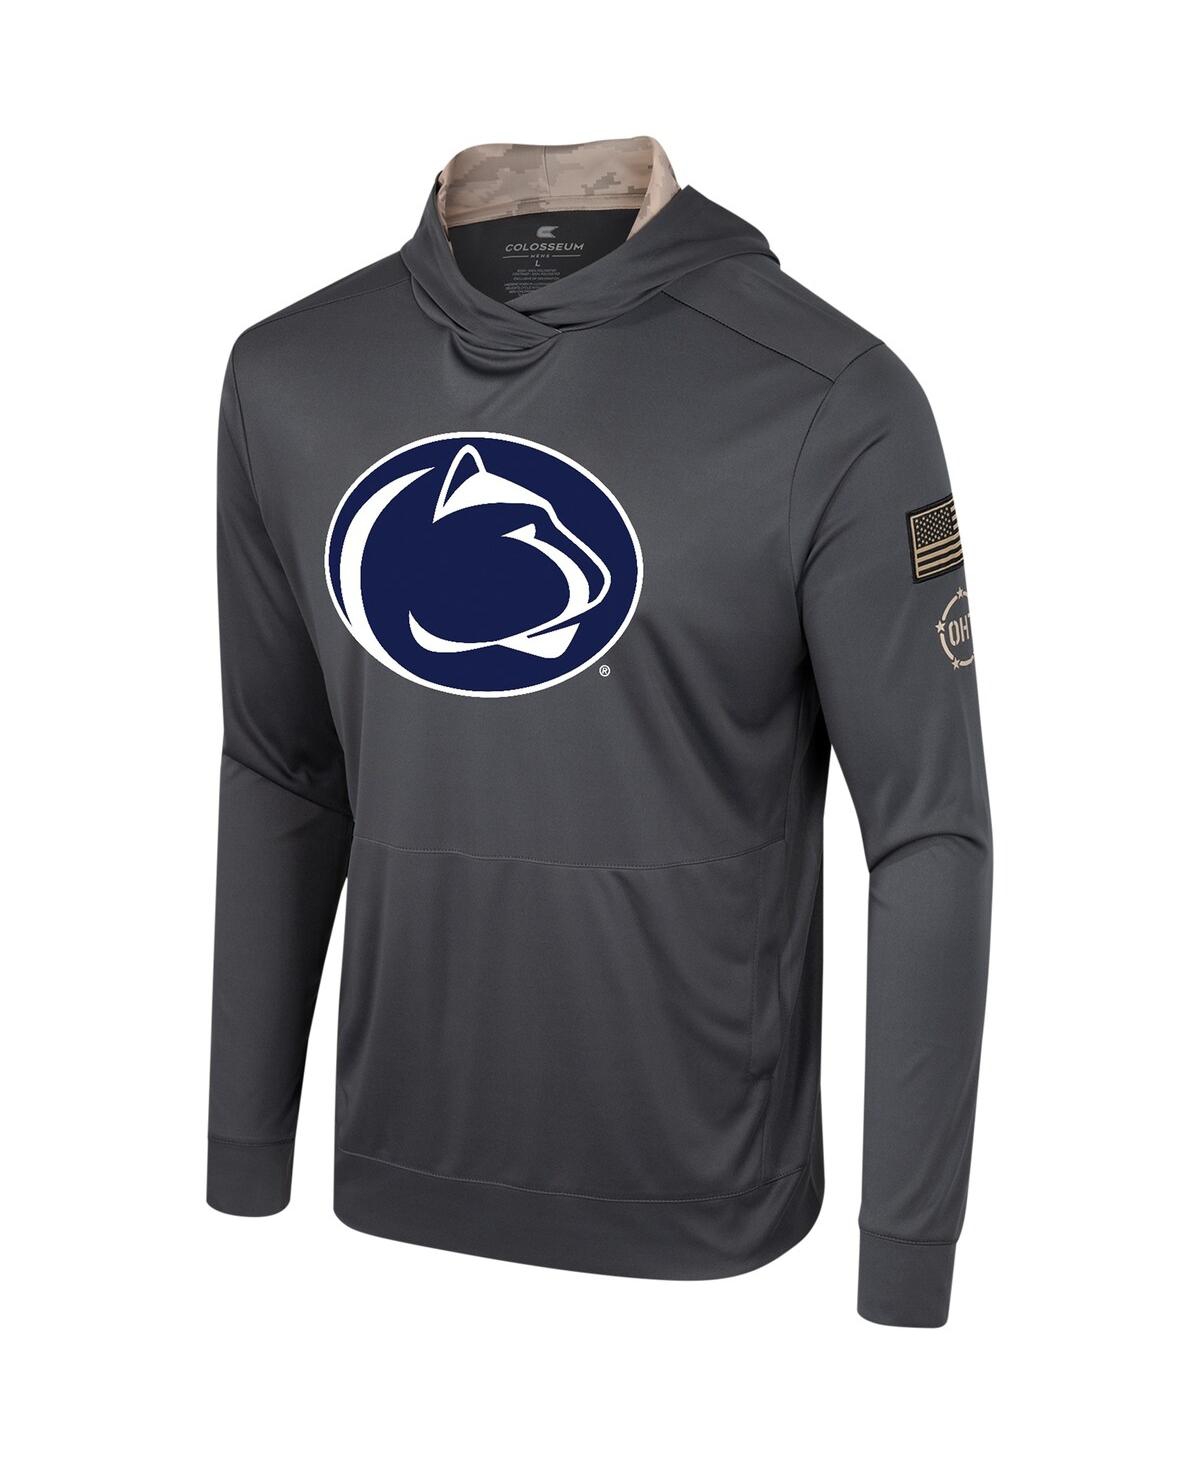 Shop Colosseum Men's  Charcoal Penn State Nittany Lions Oht Military-inspired Appreciation Long Sleeve Hoo